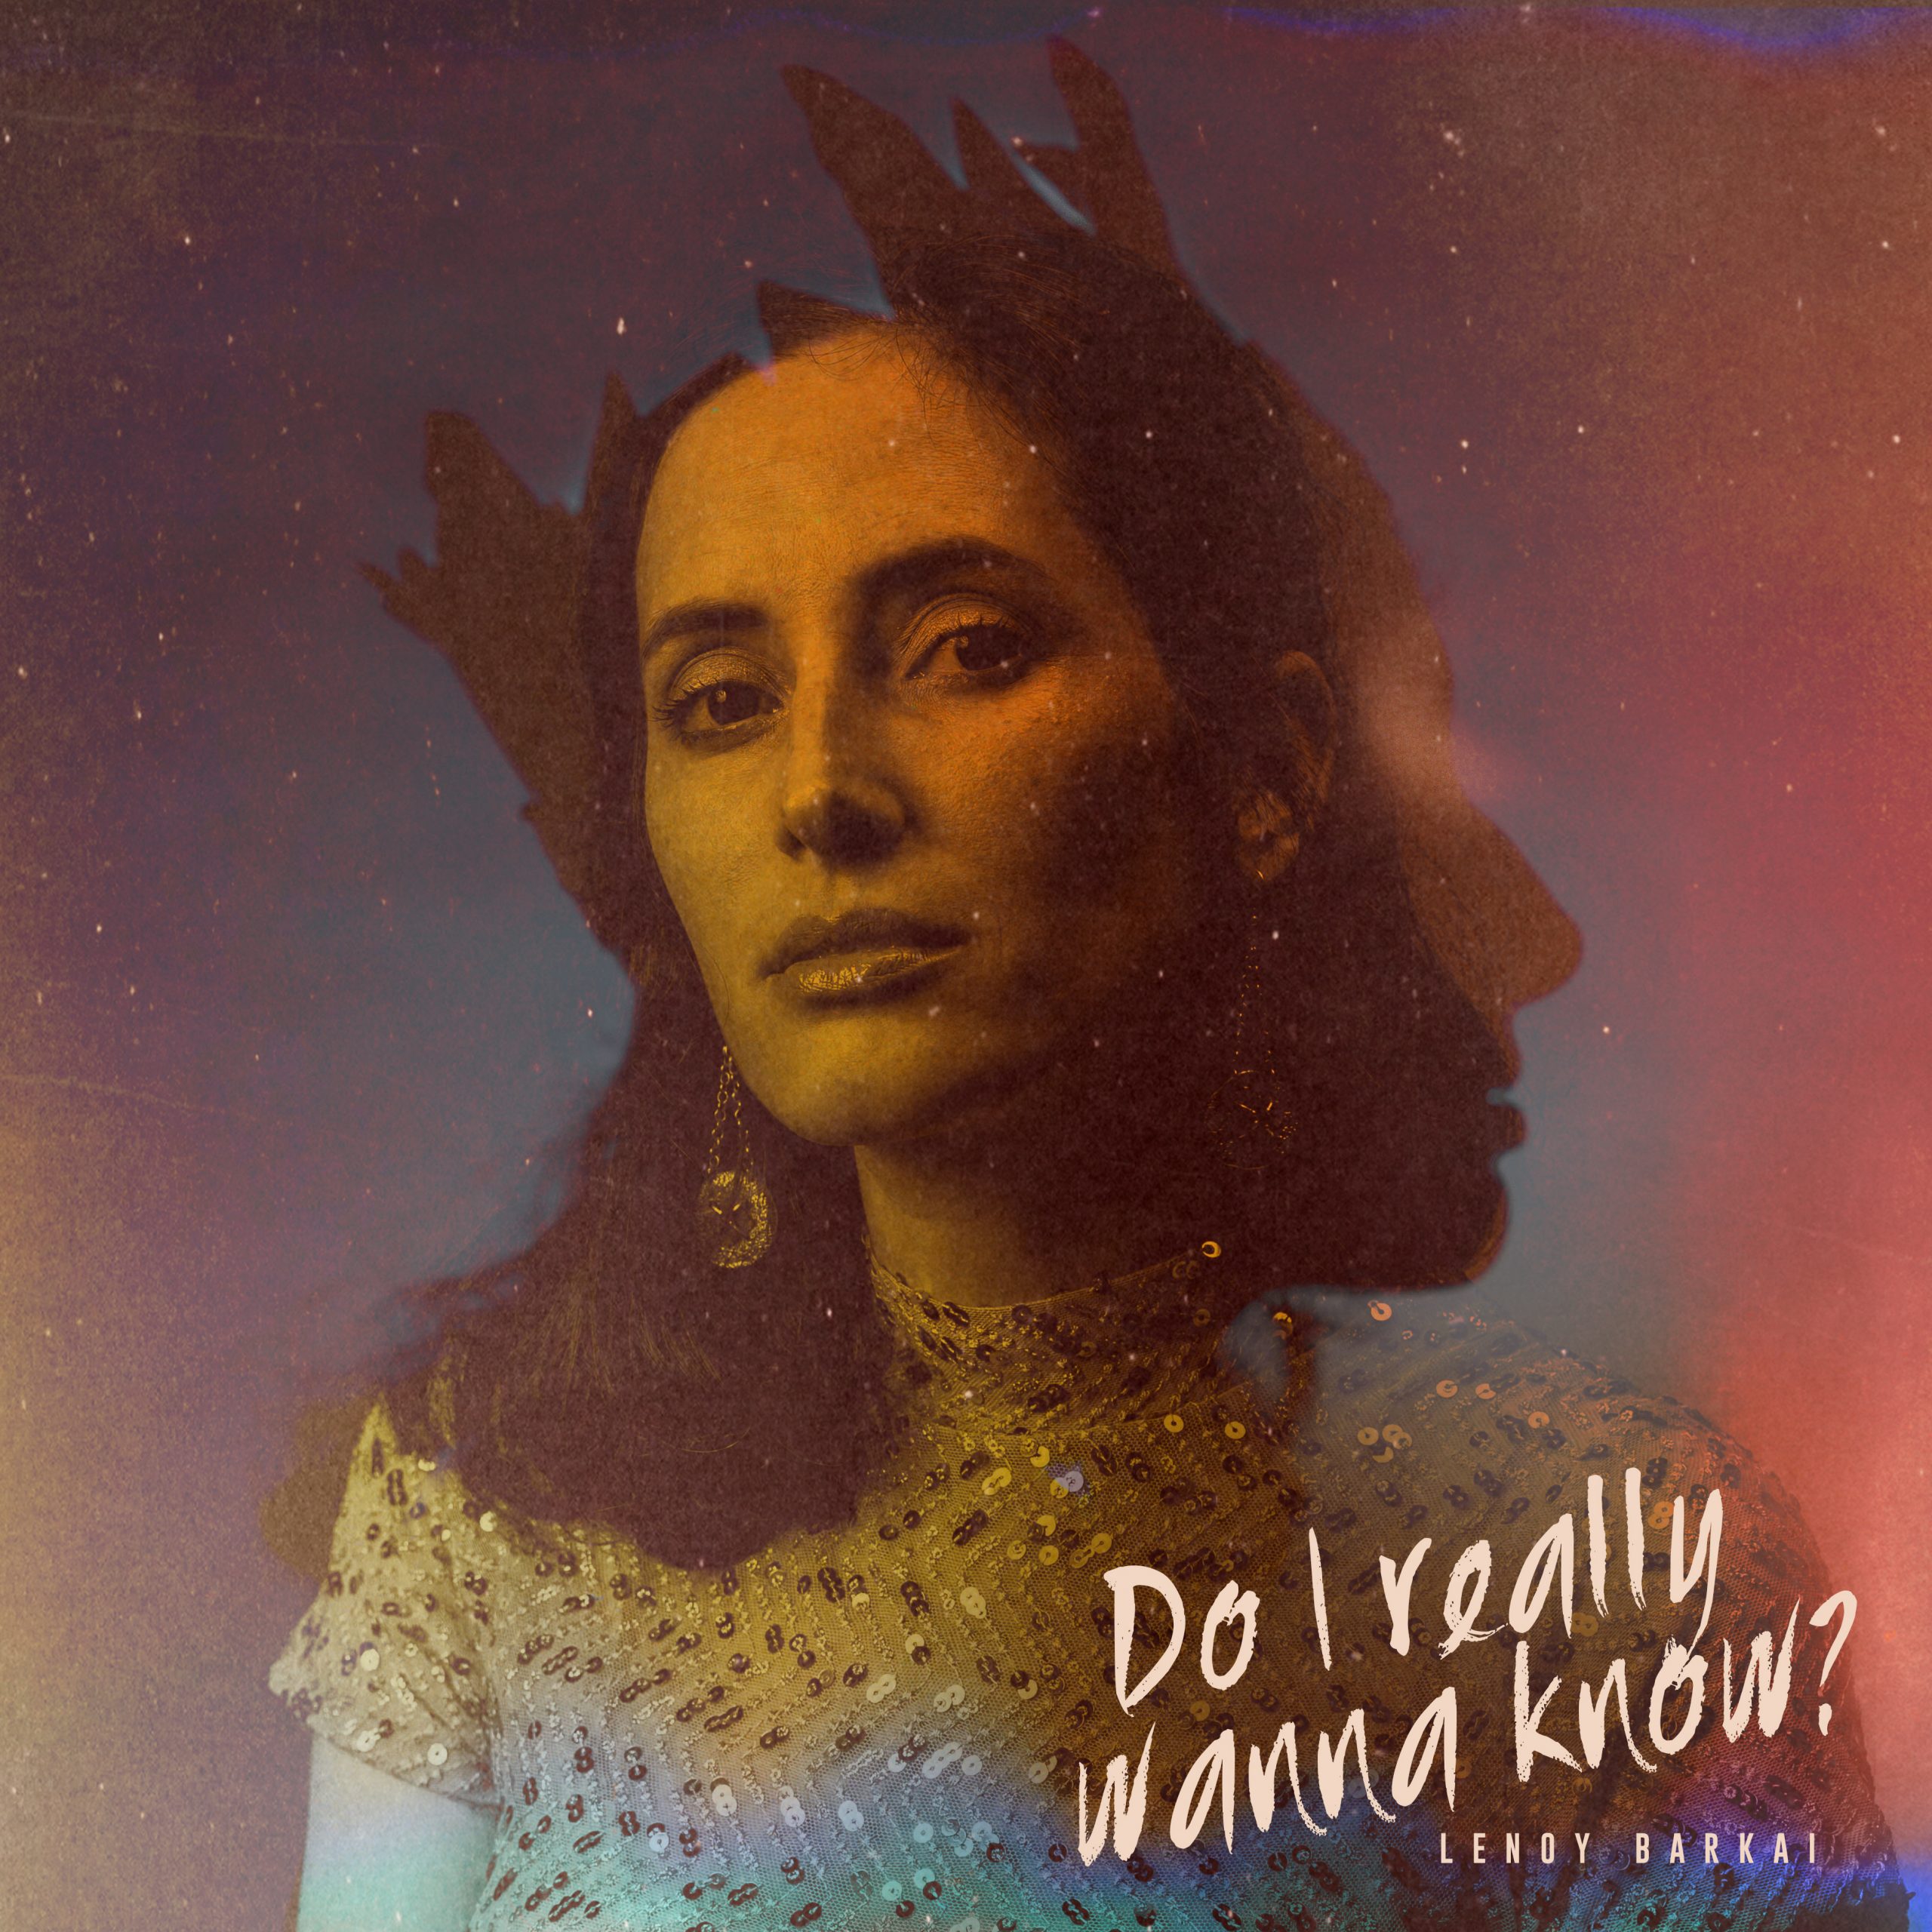 The lyrics and the imagery are in dialogue with each other on new single and video “Do I Really Wanna Know?” from Lenoy Barkai’s debut album, Paper Crown.